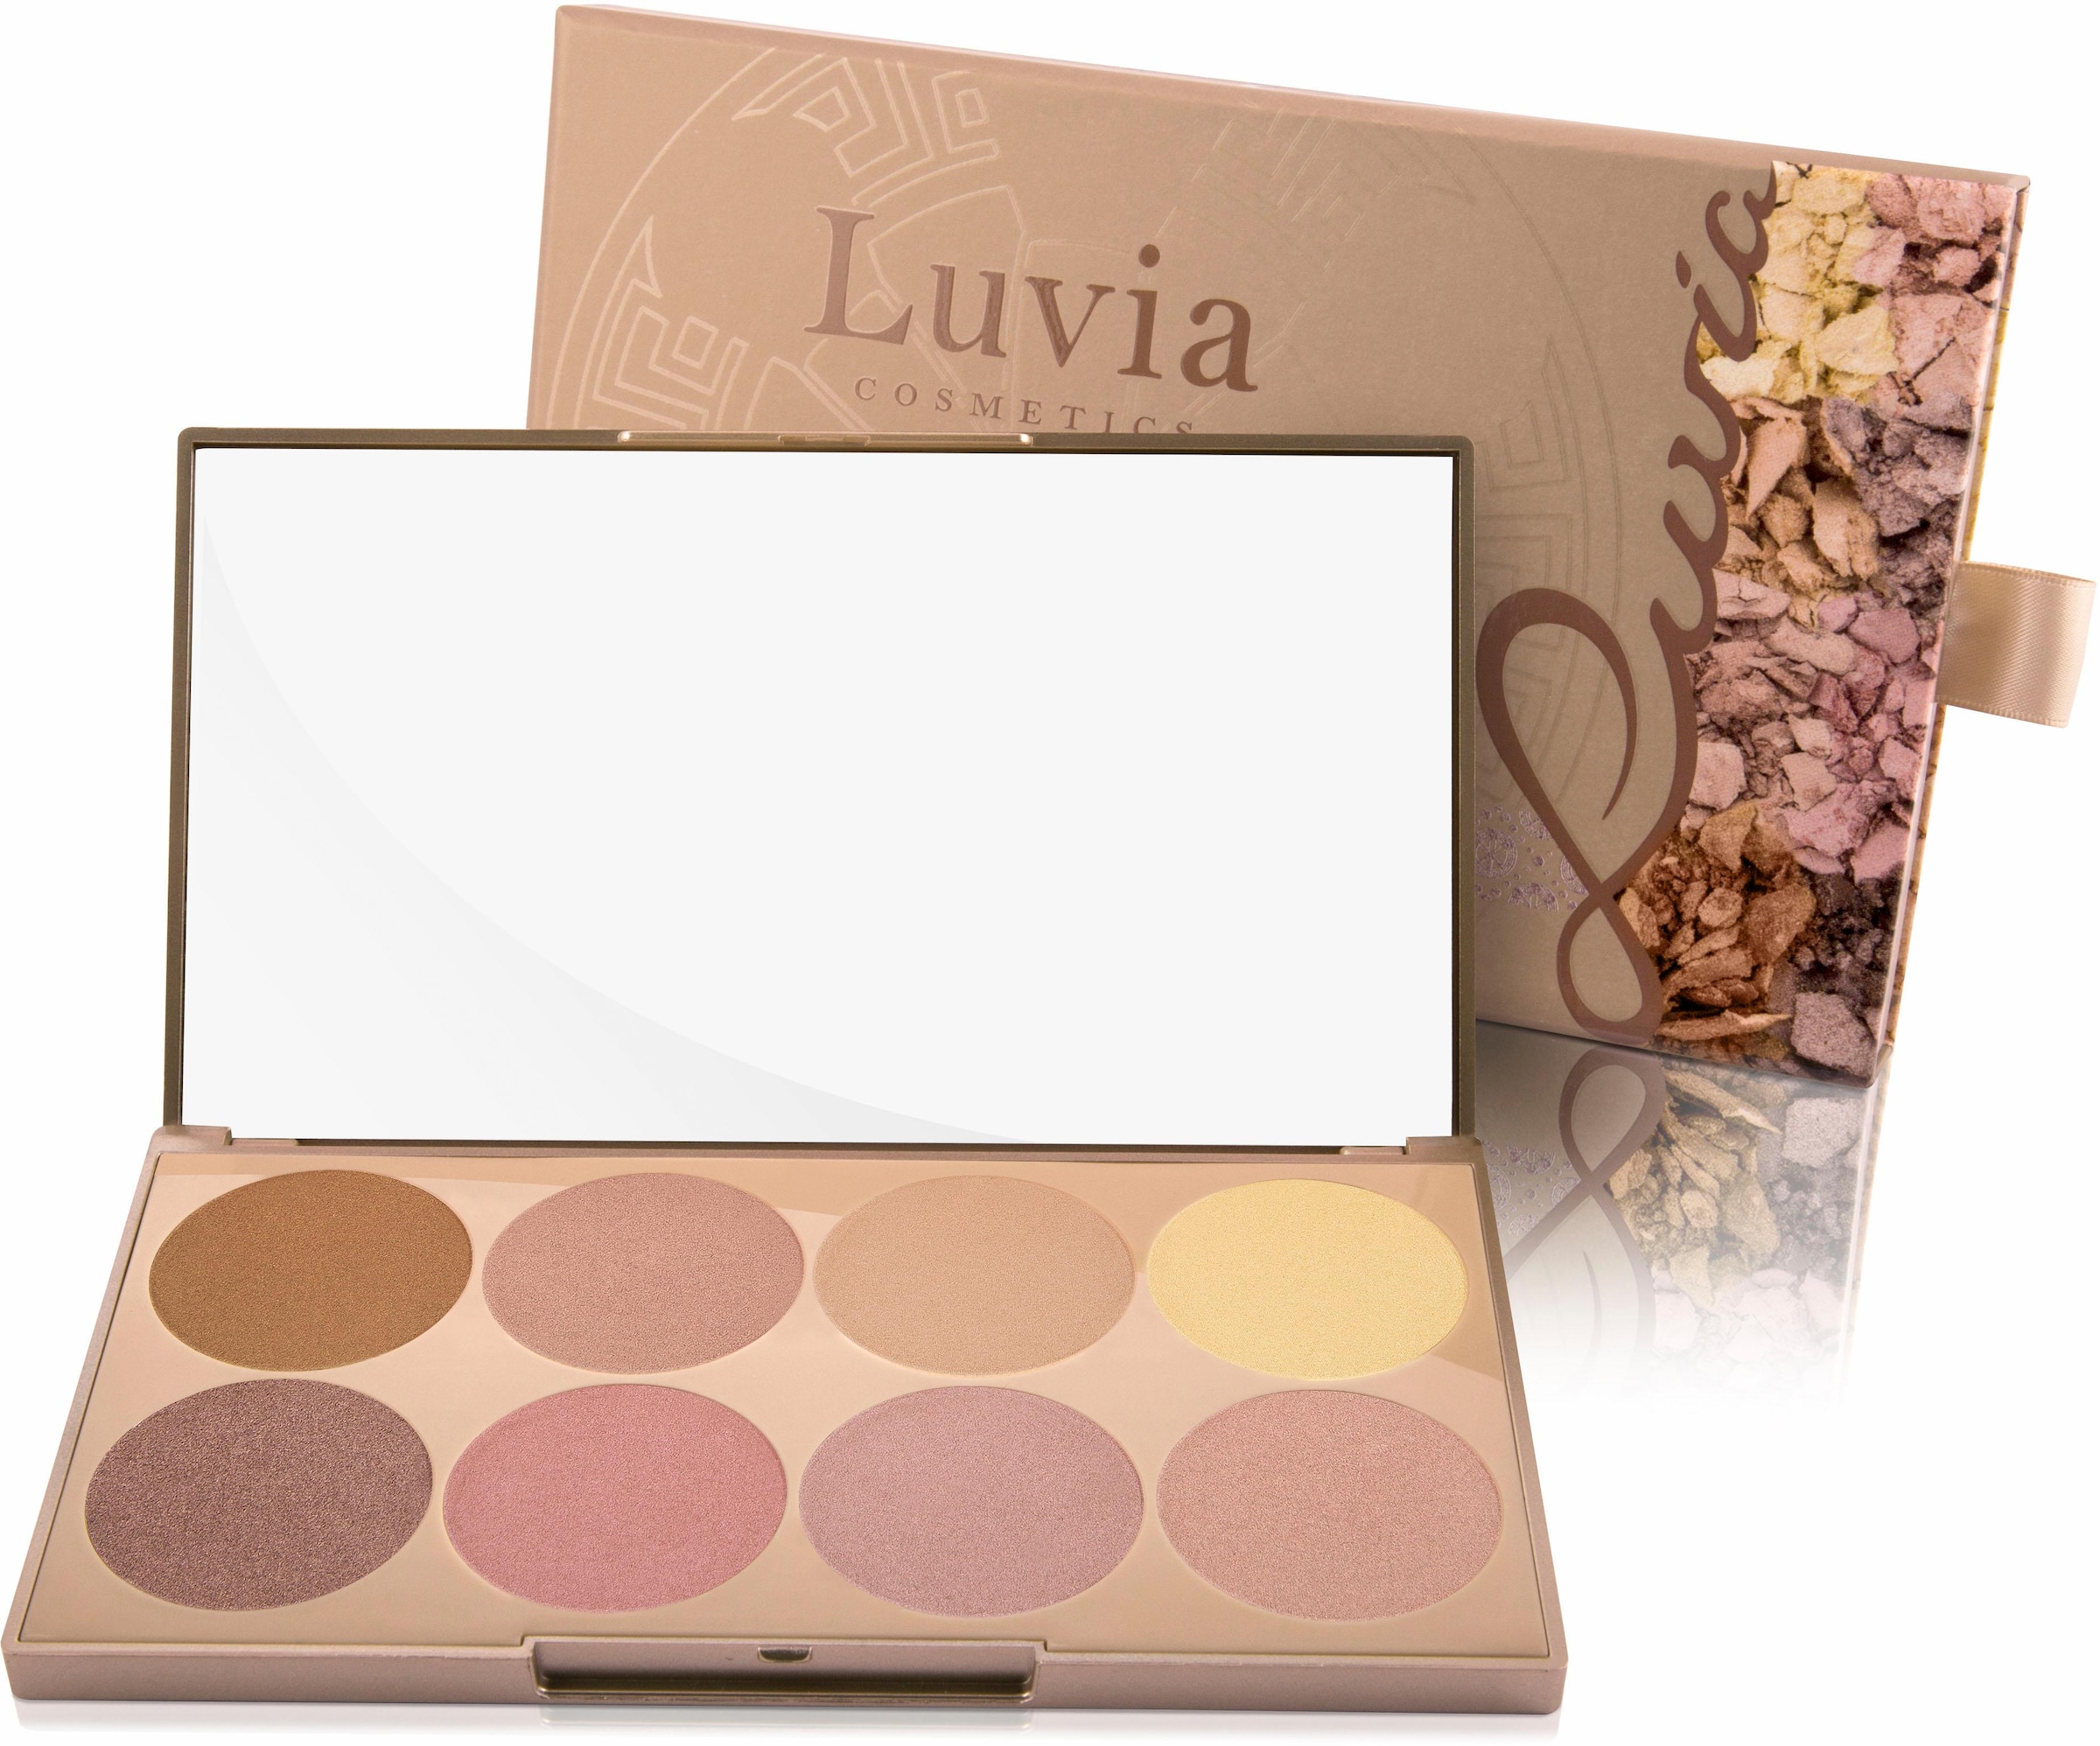 Highlighter-Palette »Prime 1« Farben Essential Contouring Vol. Glow tlg.) Shades (8 Luvia 8 Cosmetics